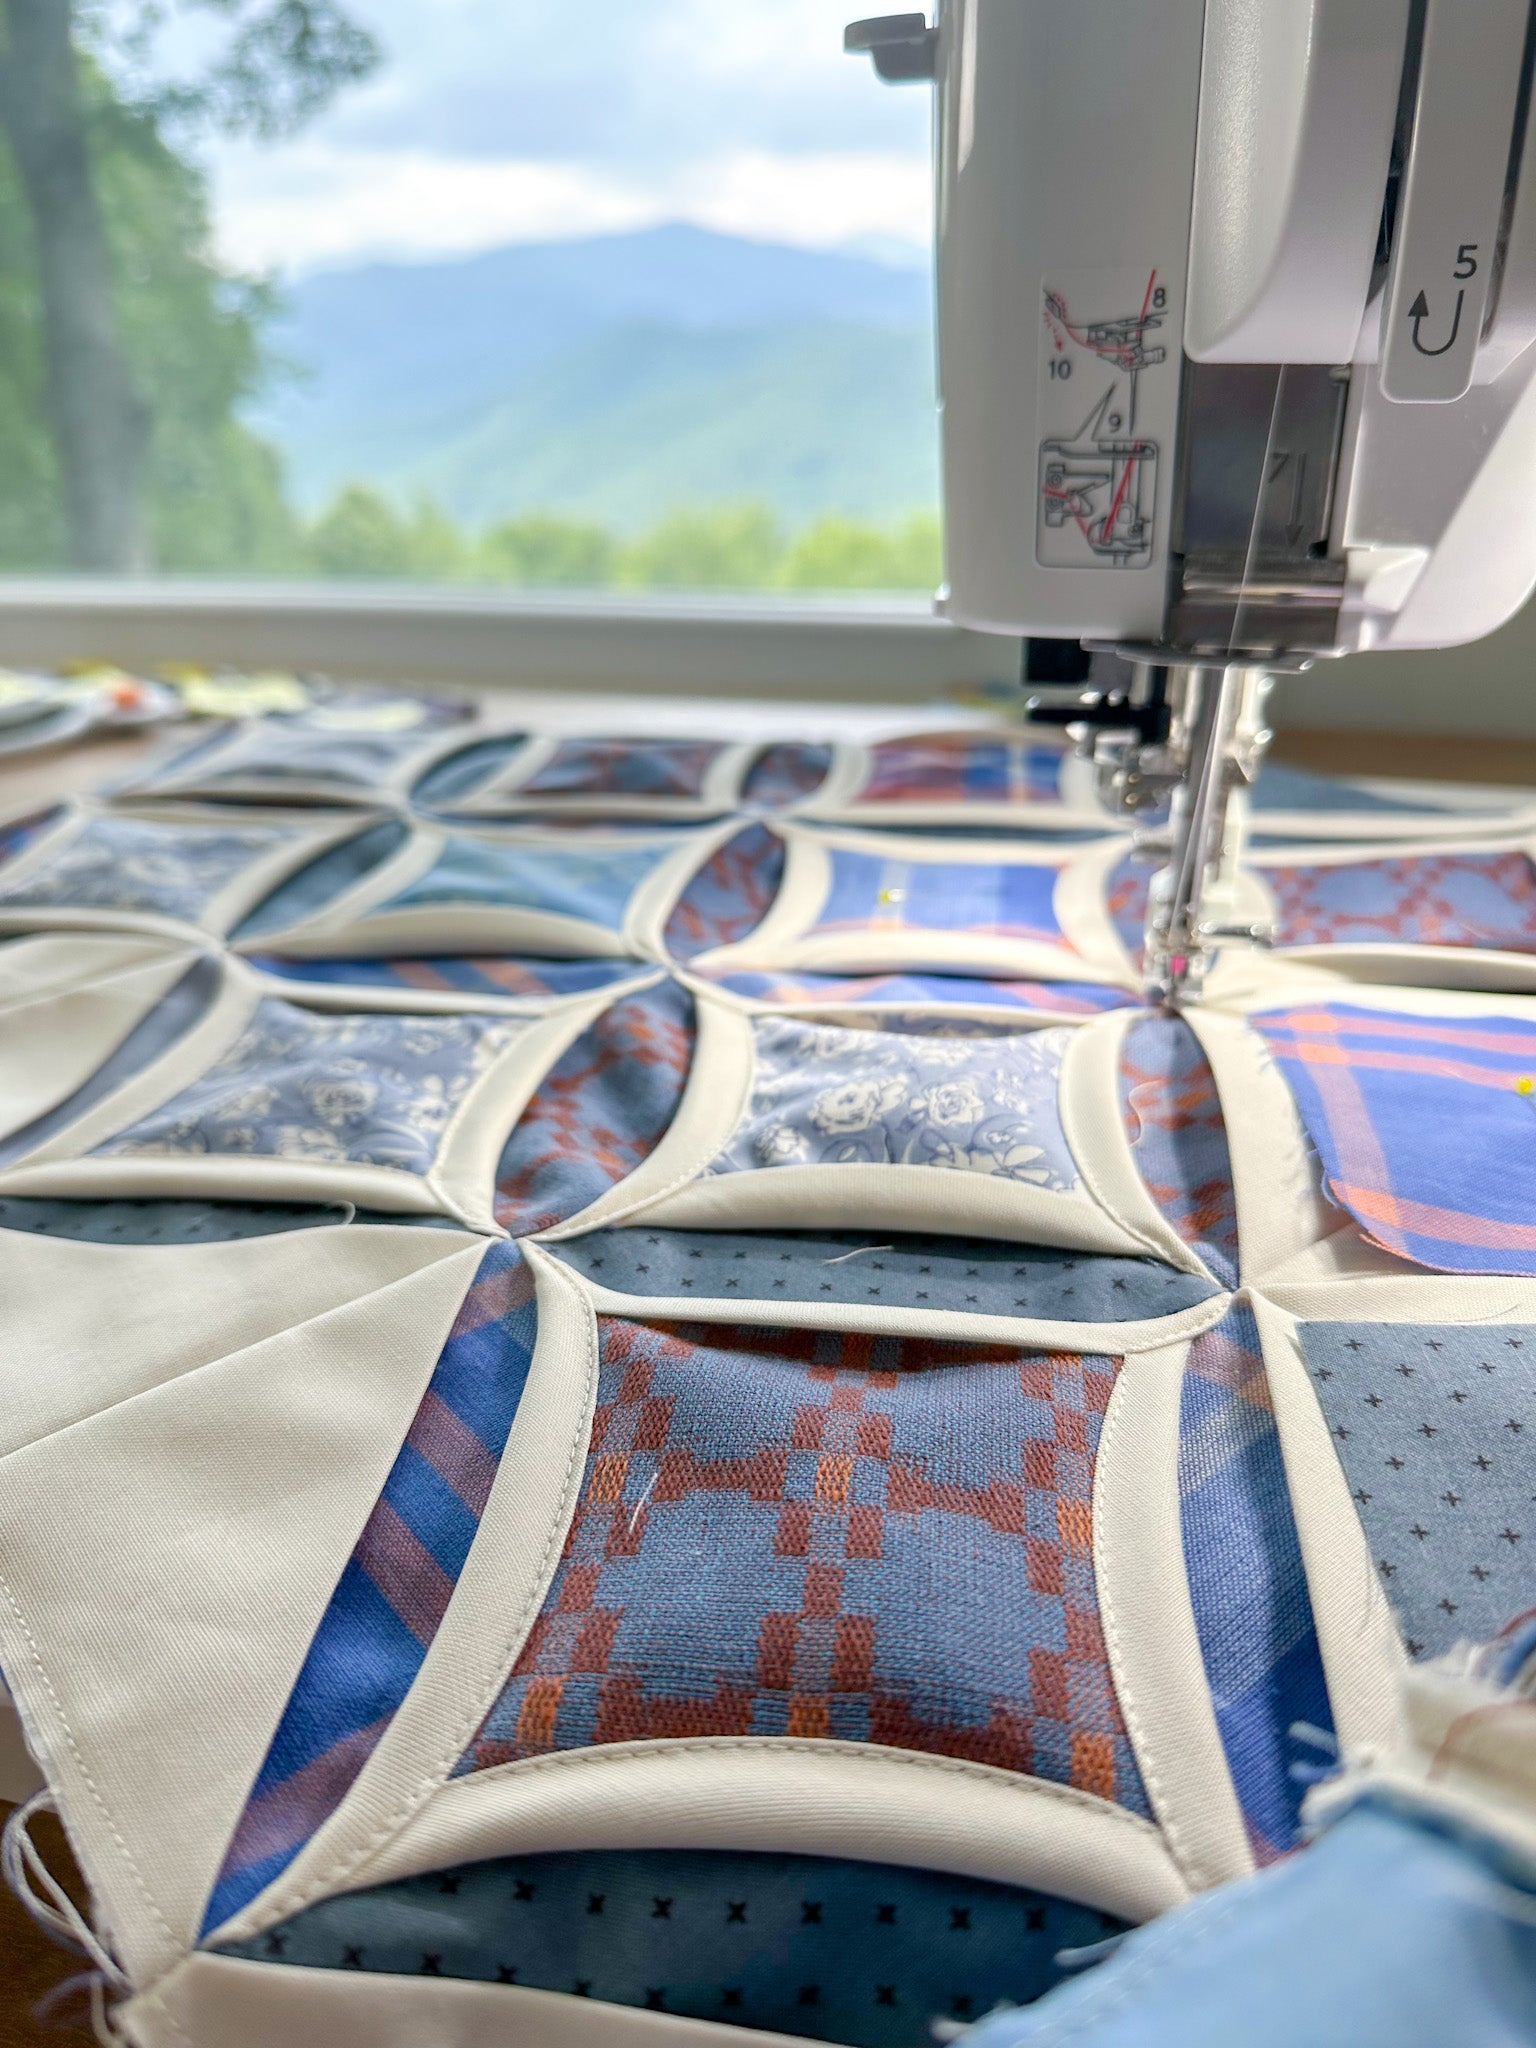 7P Free Motion Quilting Template Series with 1 Brazil